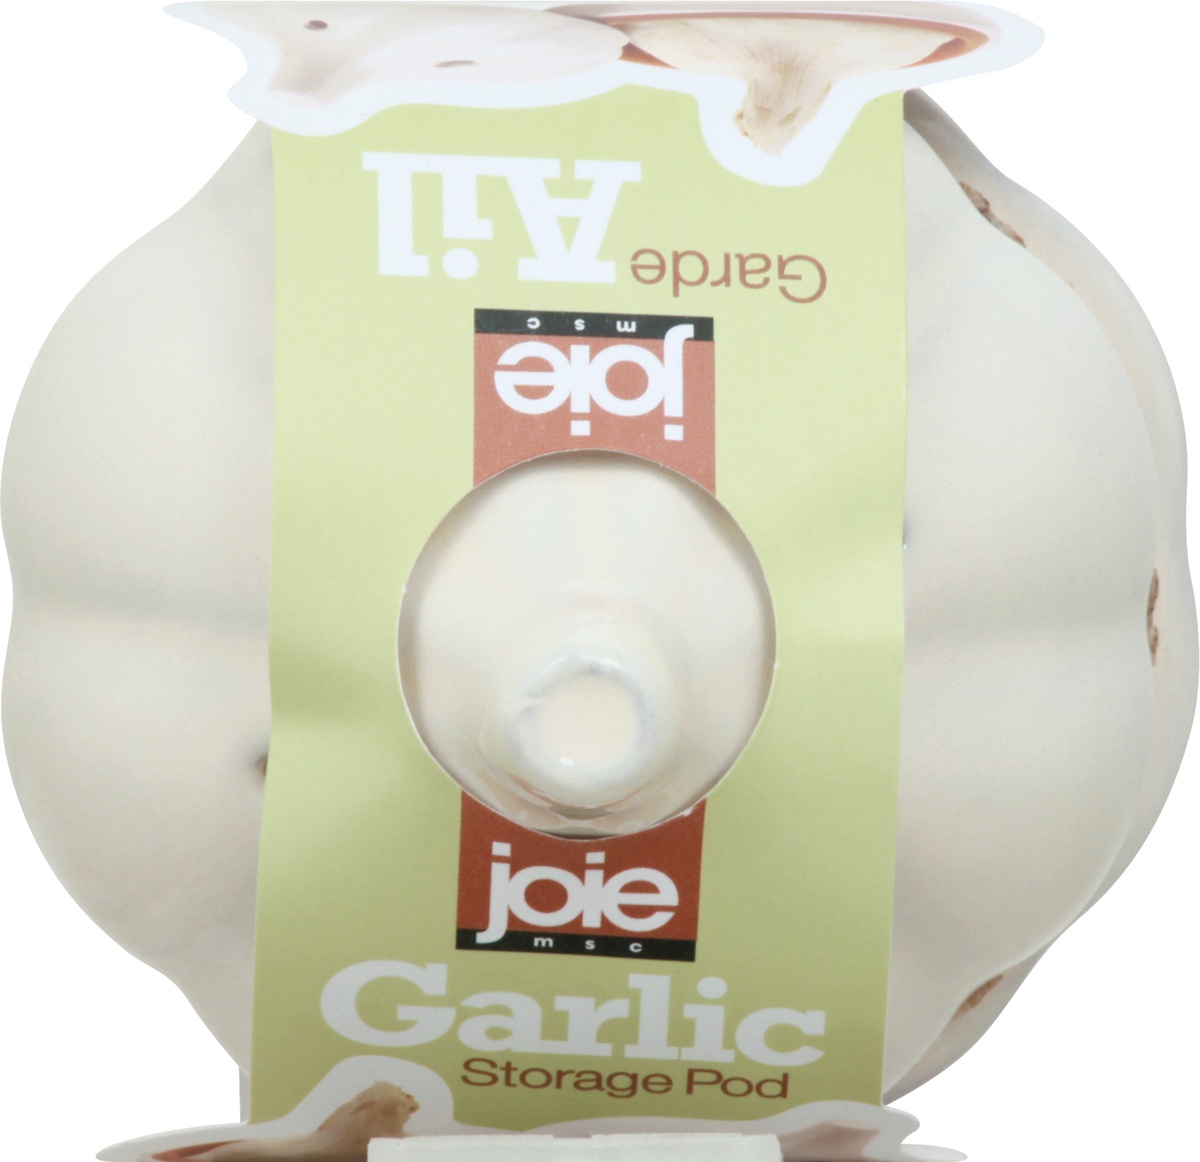 Explore our selection of items that will assist you to be the very best  version of yourself Clearly Fresh Garlic Food Storage Pod Joie